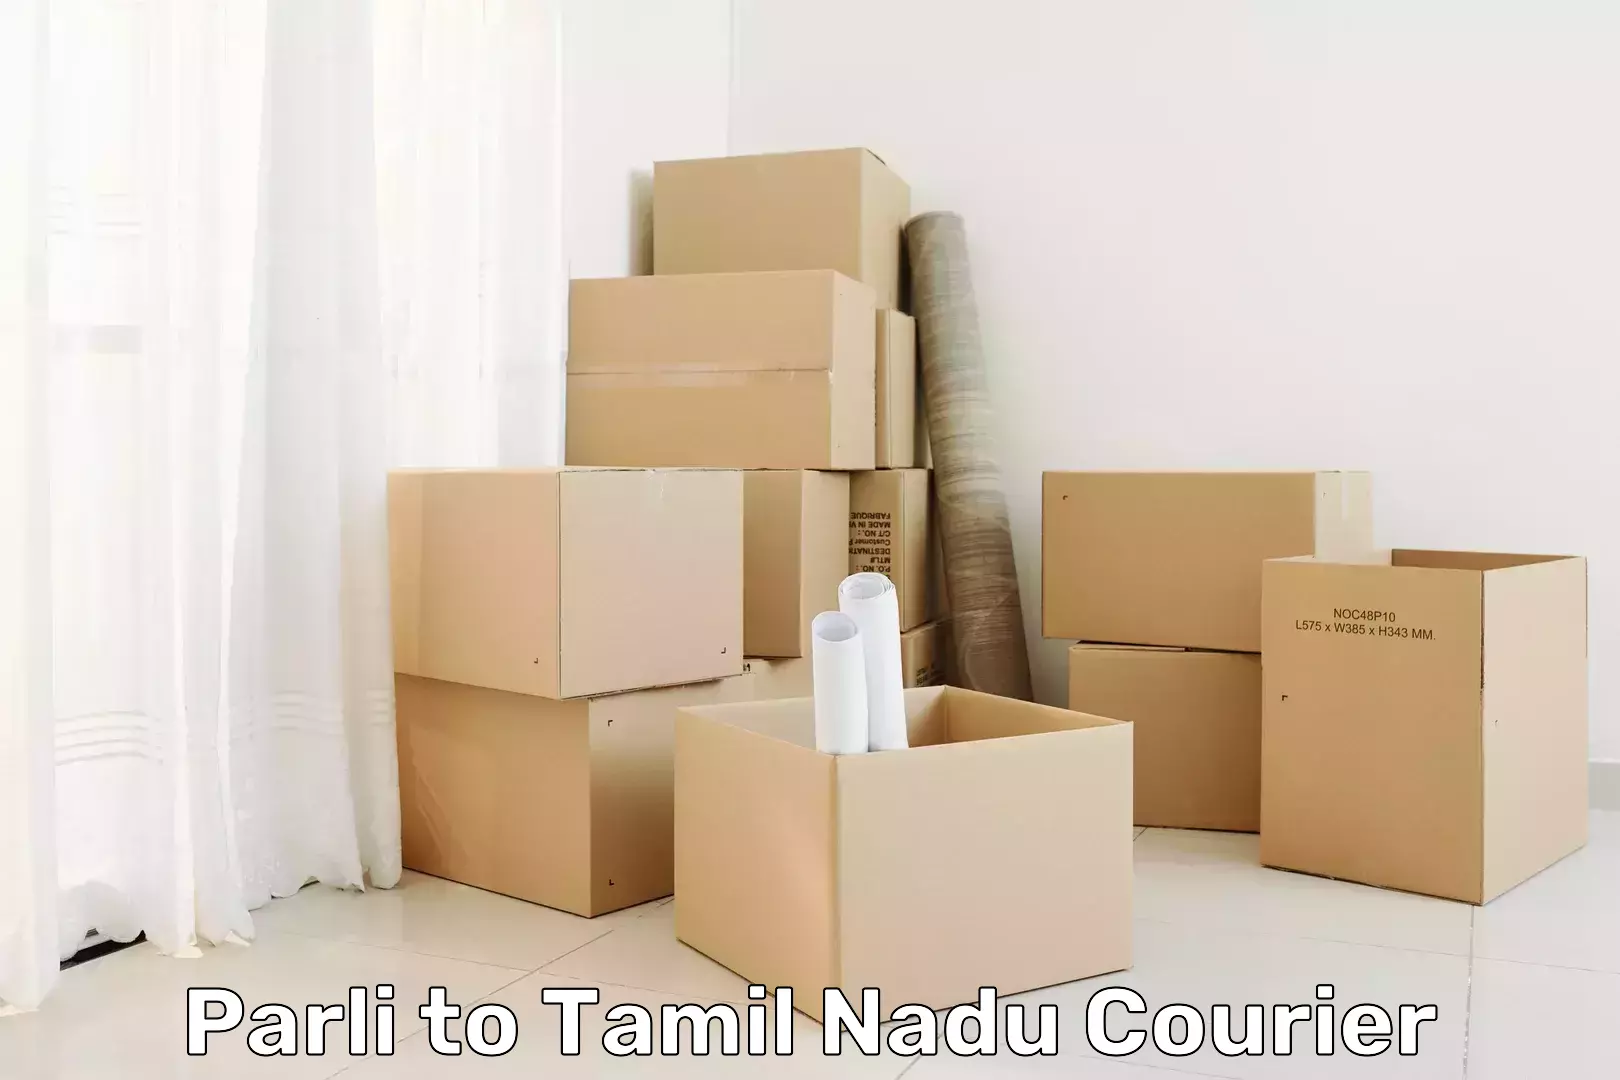 Multi-carrier shipping in Parli to Tamil Nadu